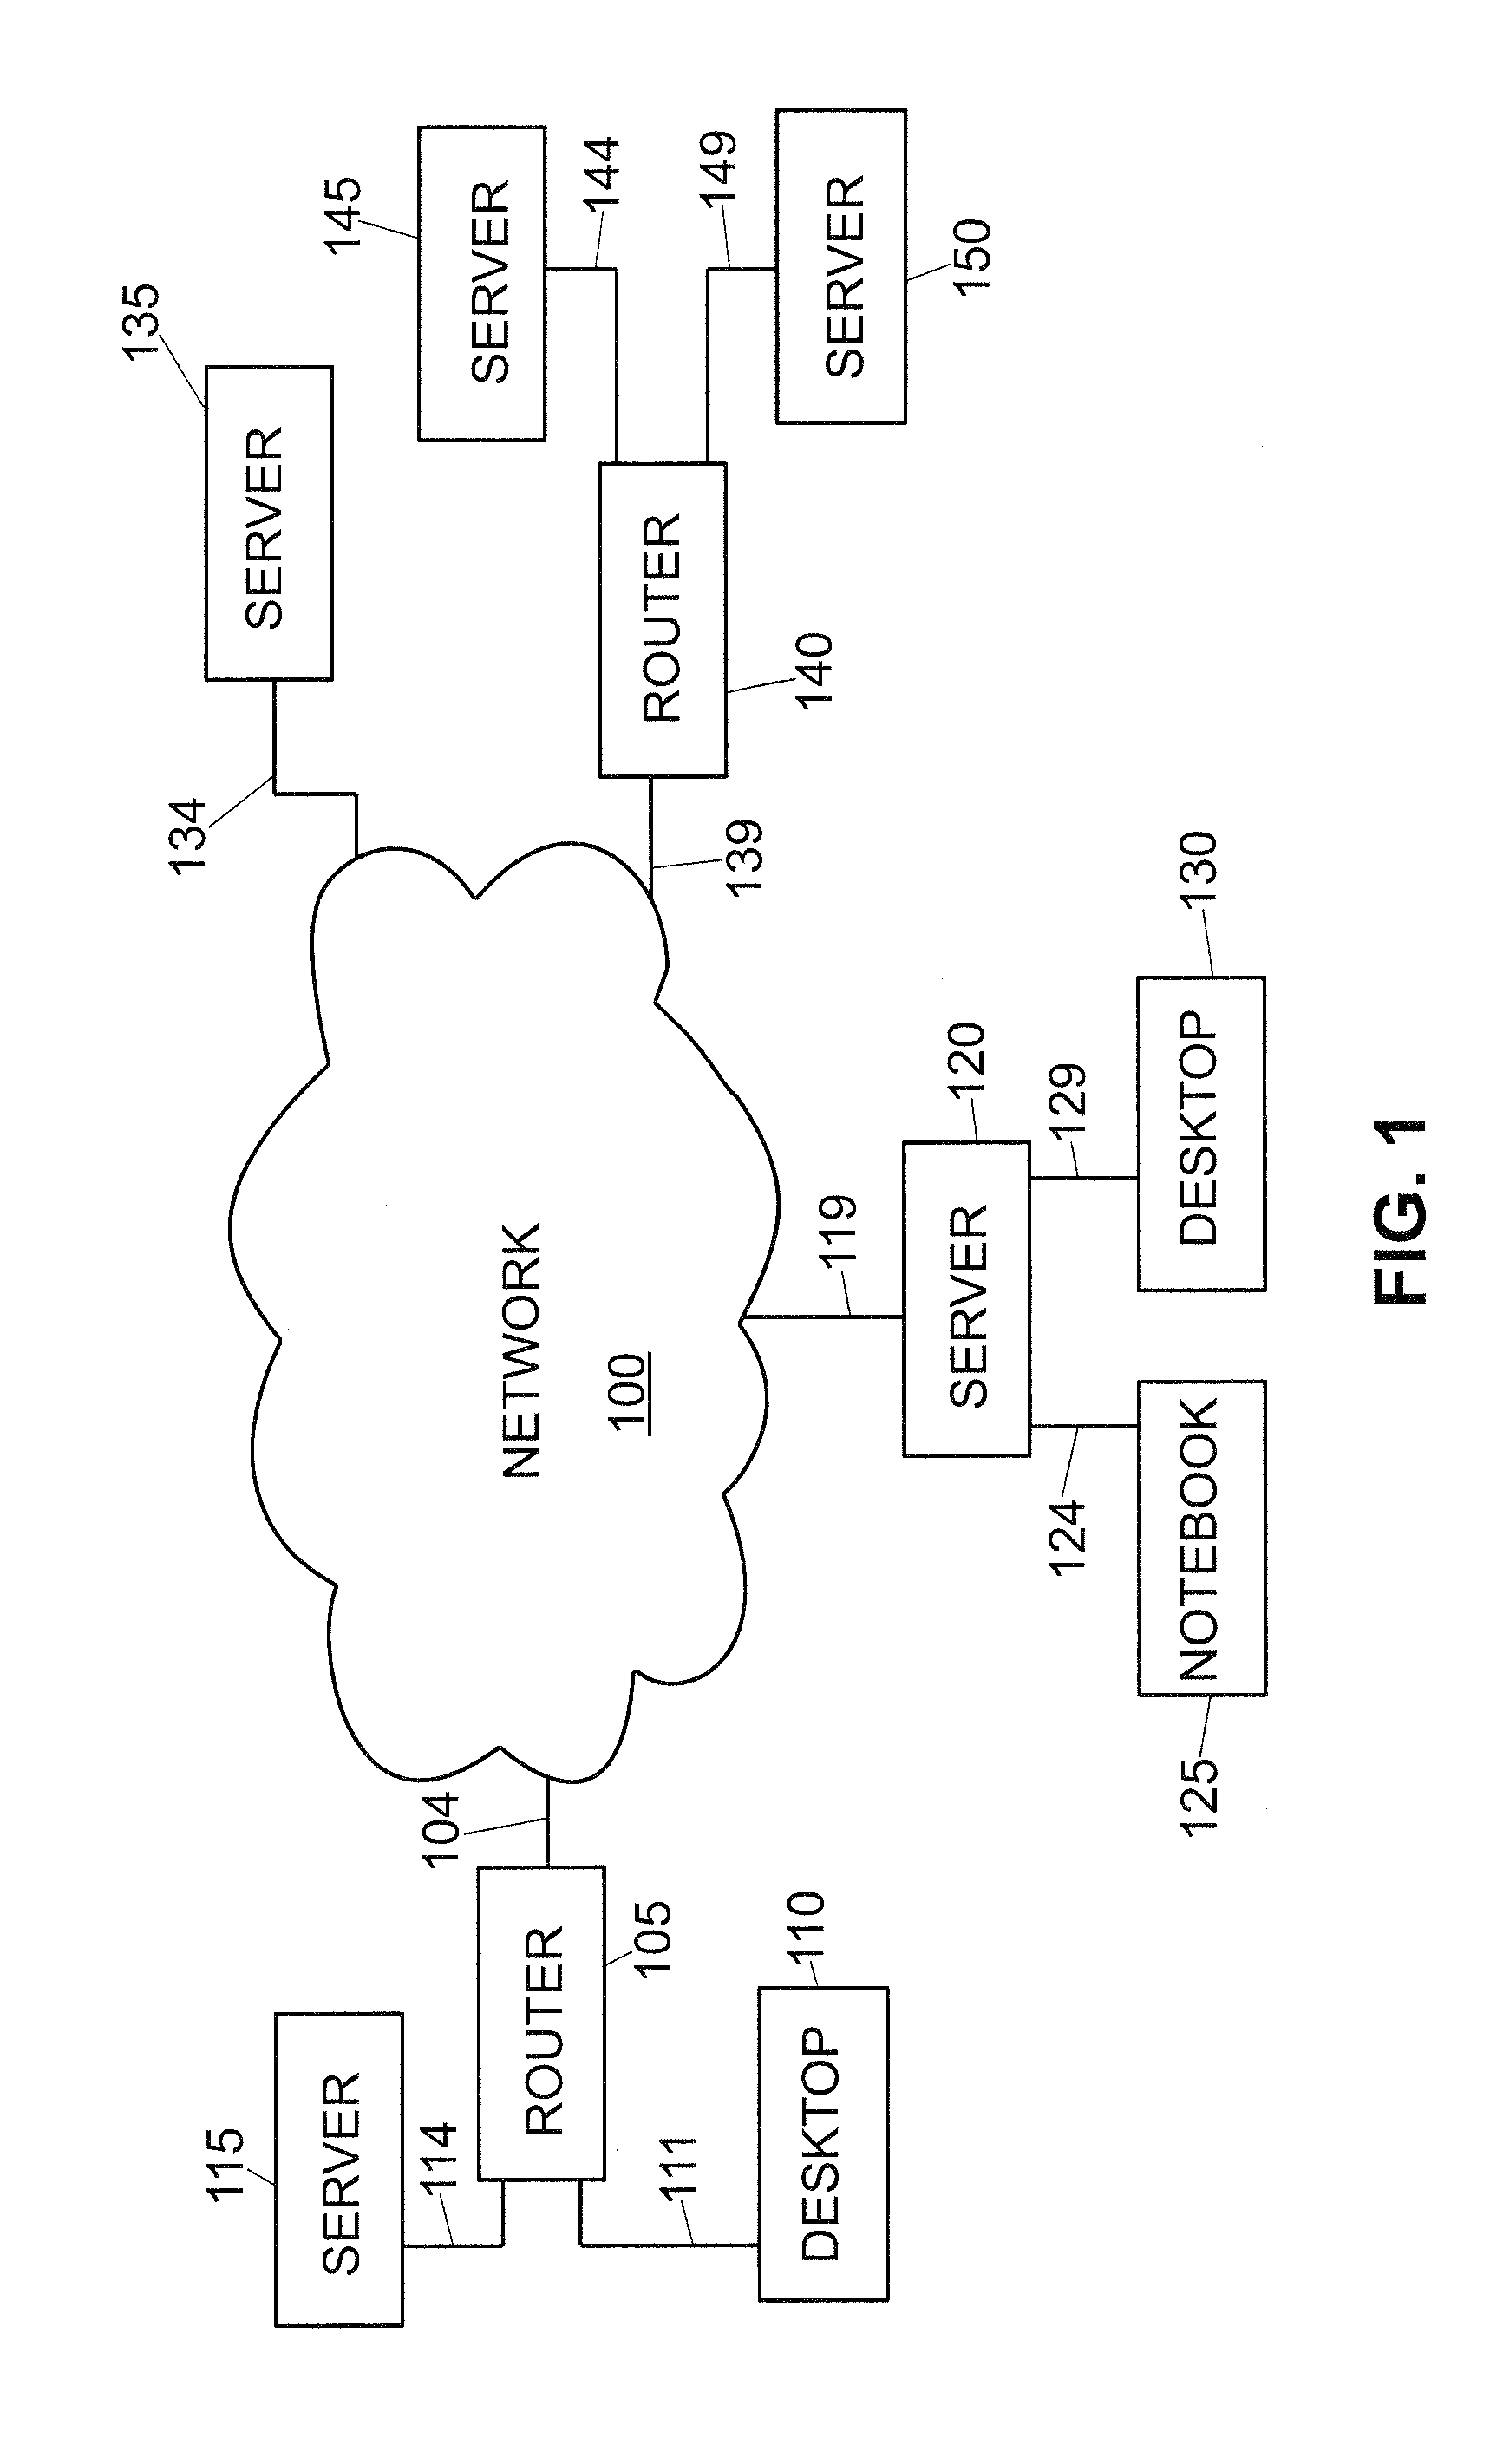 System for identifying content of digital data